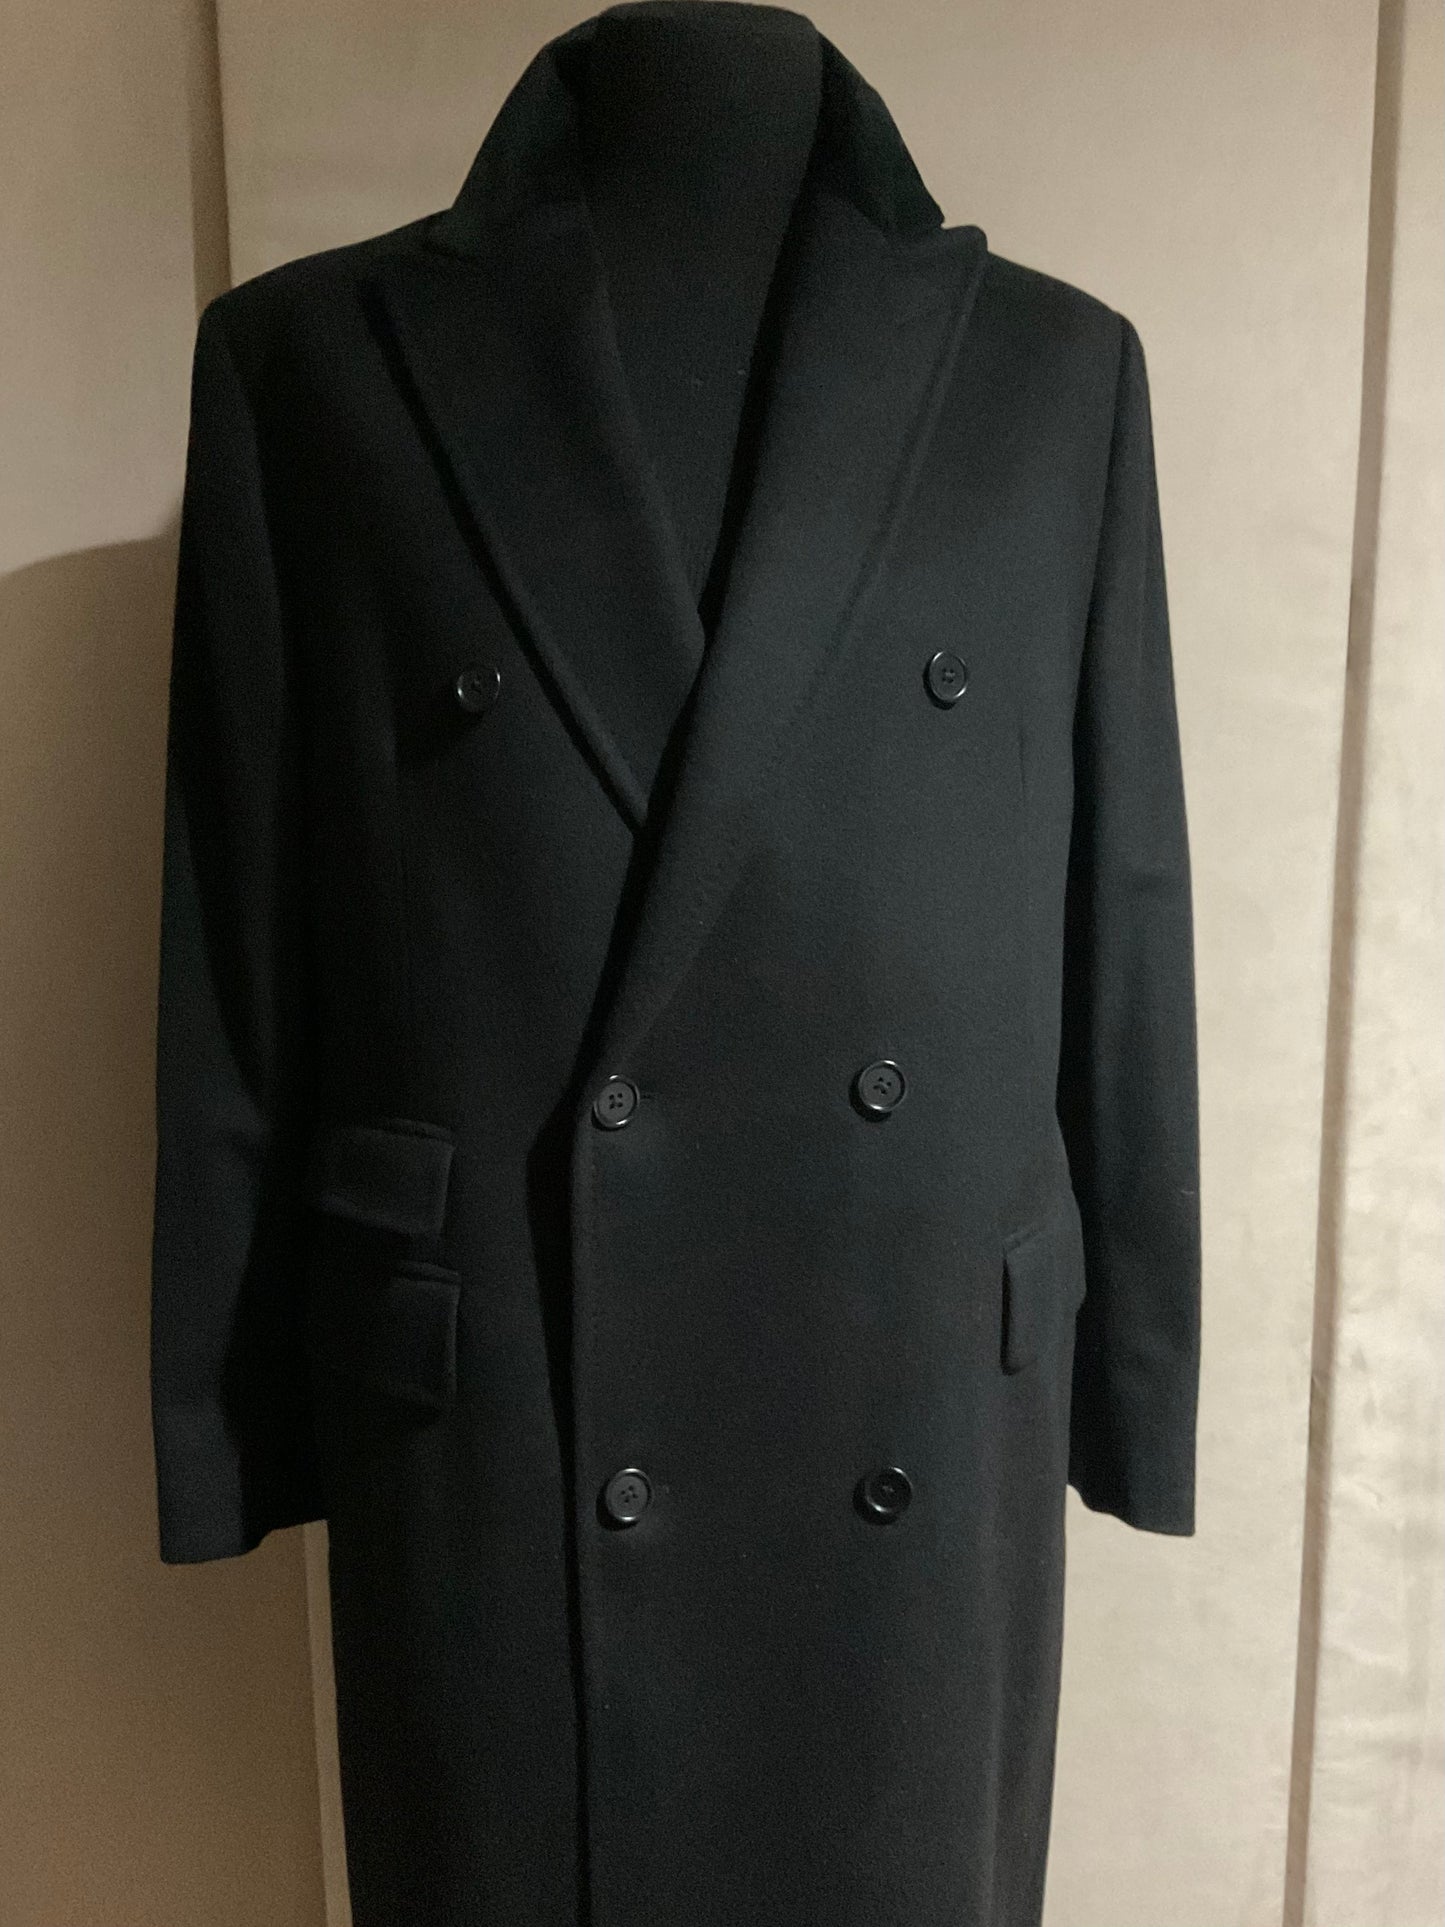 R P OVERCOAT / BLACK / PURE CASHMERE / BLACK VELVET COLLAR / DOUBLE BREASTED / MADE IN CANADA / NEW / 42 / 44